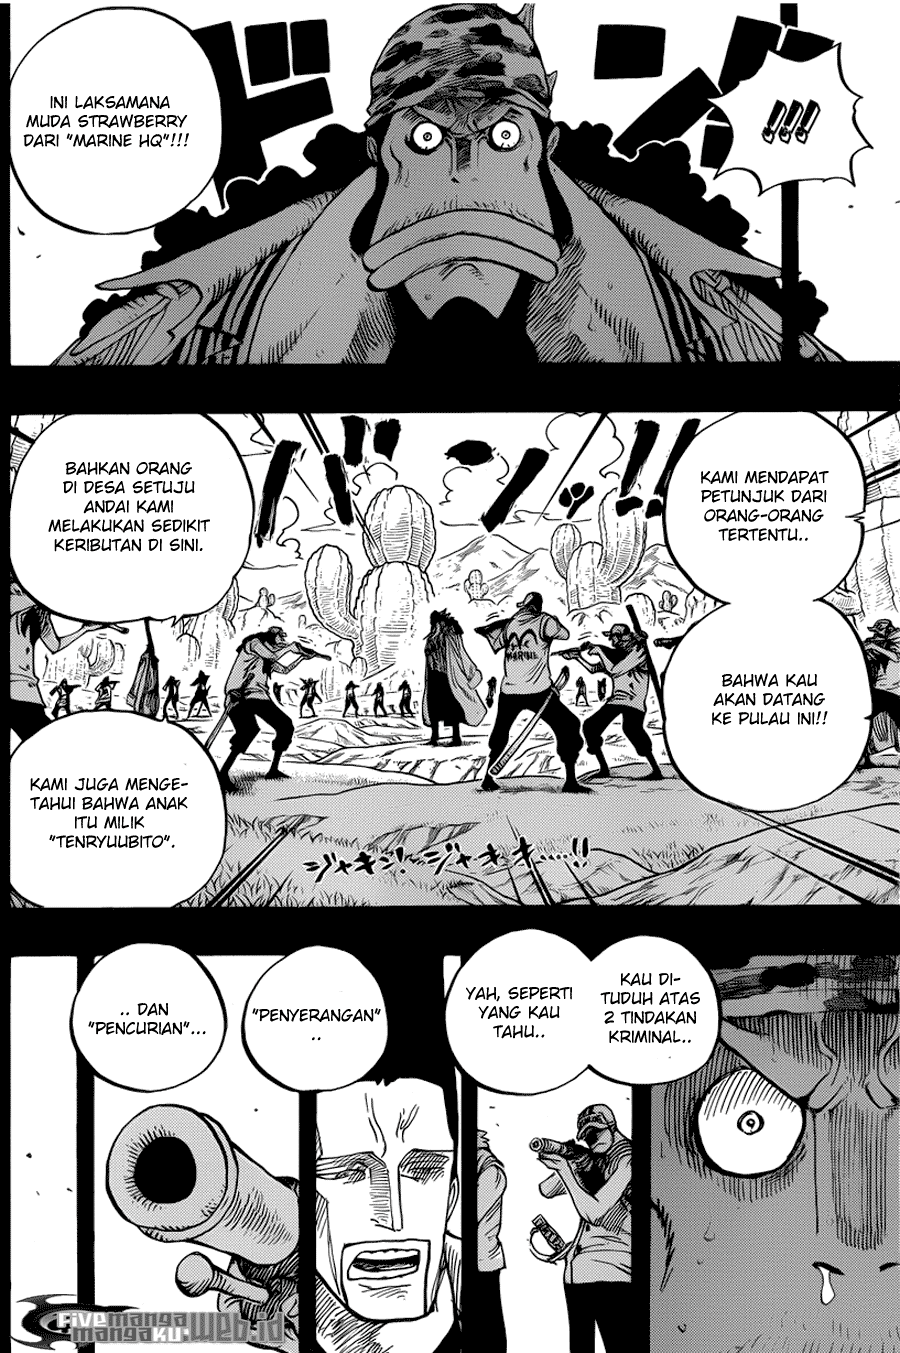 One Piece Chapter 623 – Si Bajak Laut Fisher Tiger - 139